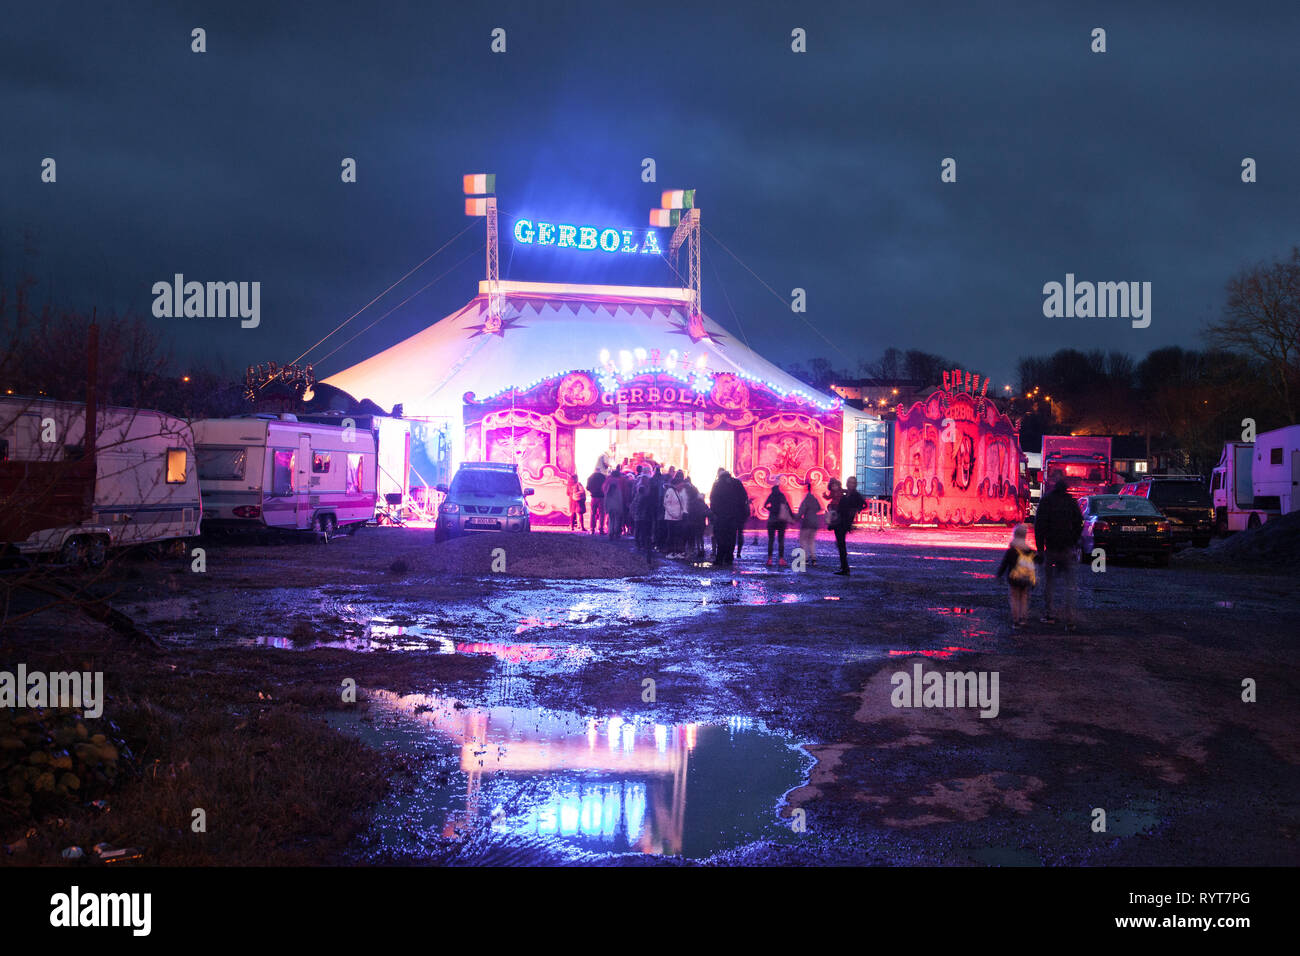 Carrigaline, Cork, Ireland. 14th March, 2019. Audence members queue for entrance to the Big Top  which is performing until Monday in Carrigaline, Co. Cork, Ireland. Credit: David Creedon/Alamy Live News Stock Photo